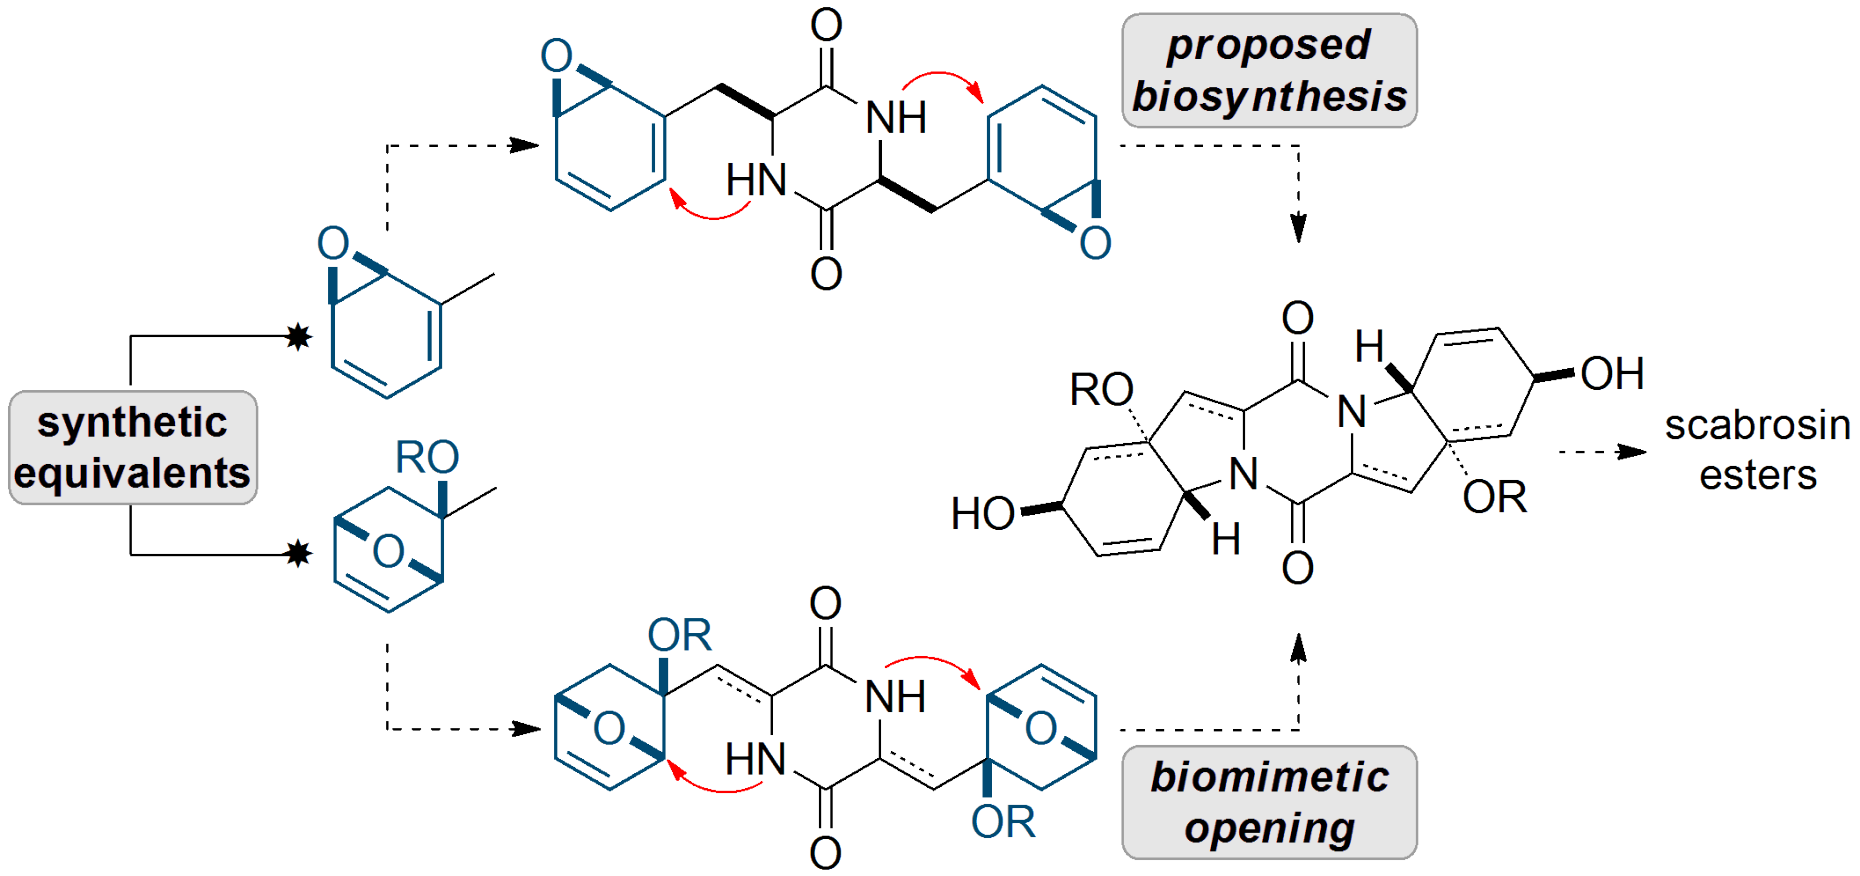 Enlarged view: A Unified Strategy to 6-5-6-5-6 Membered Epipolythiodiketopiperazines: Studies towards the Total Synthesis of Scabrosin Diacetate and Haematocin.   H. F. Zipfel, E. M. Carreira, Chem. Eur. J. 2015, 21, 12475